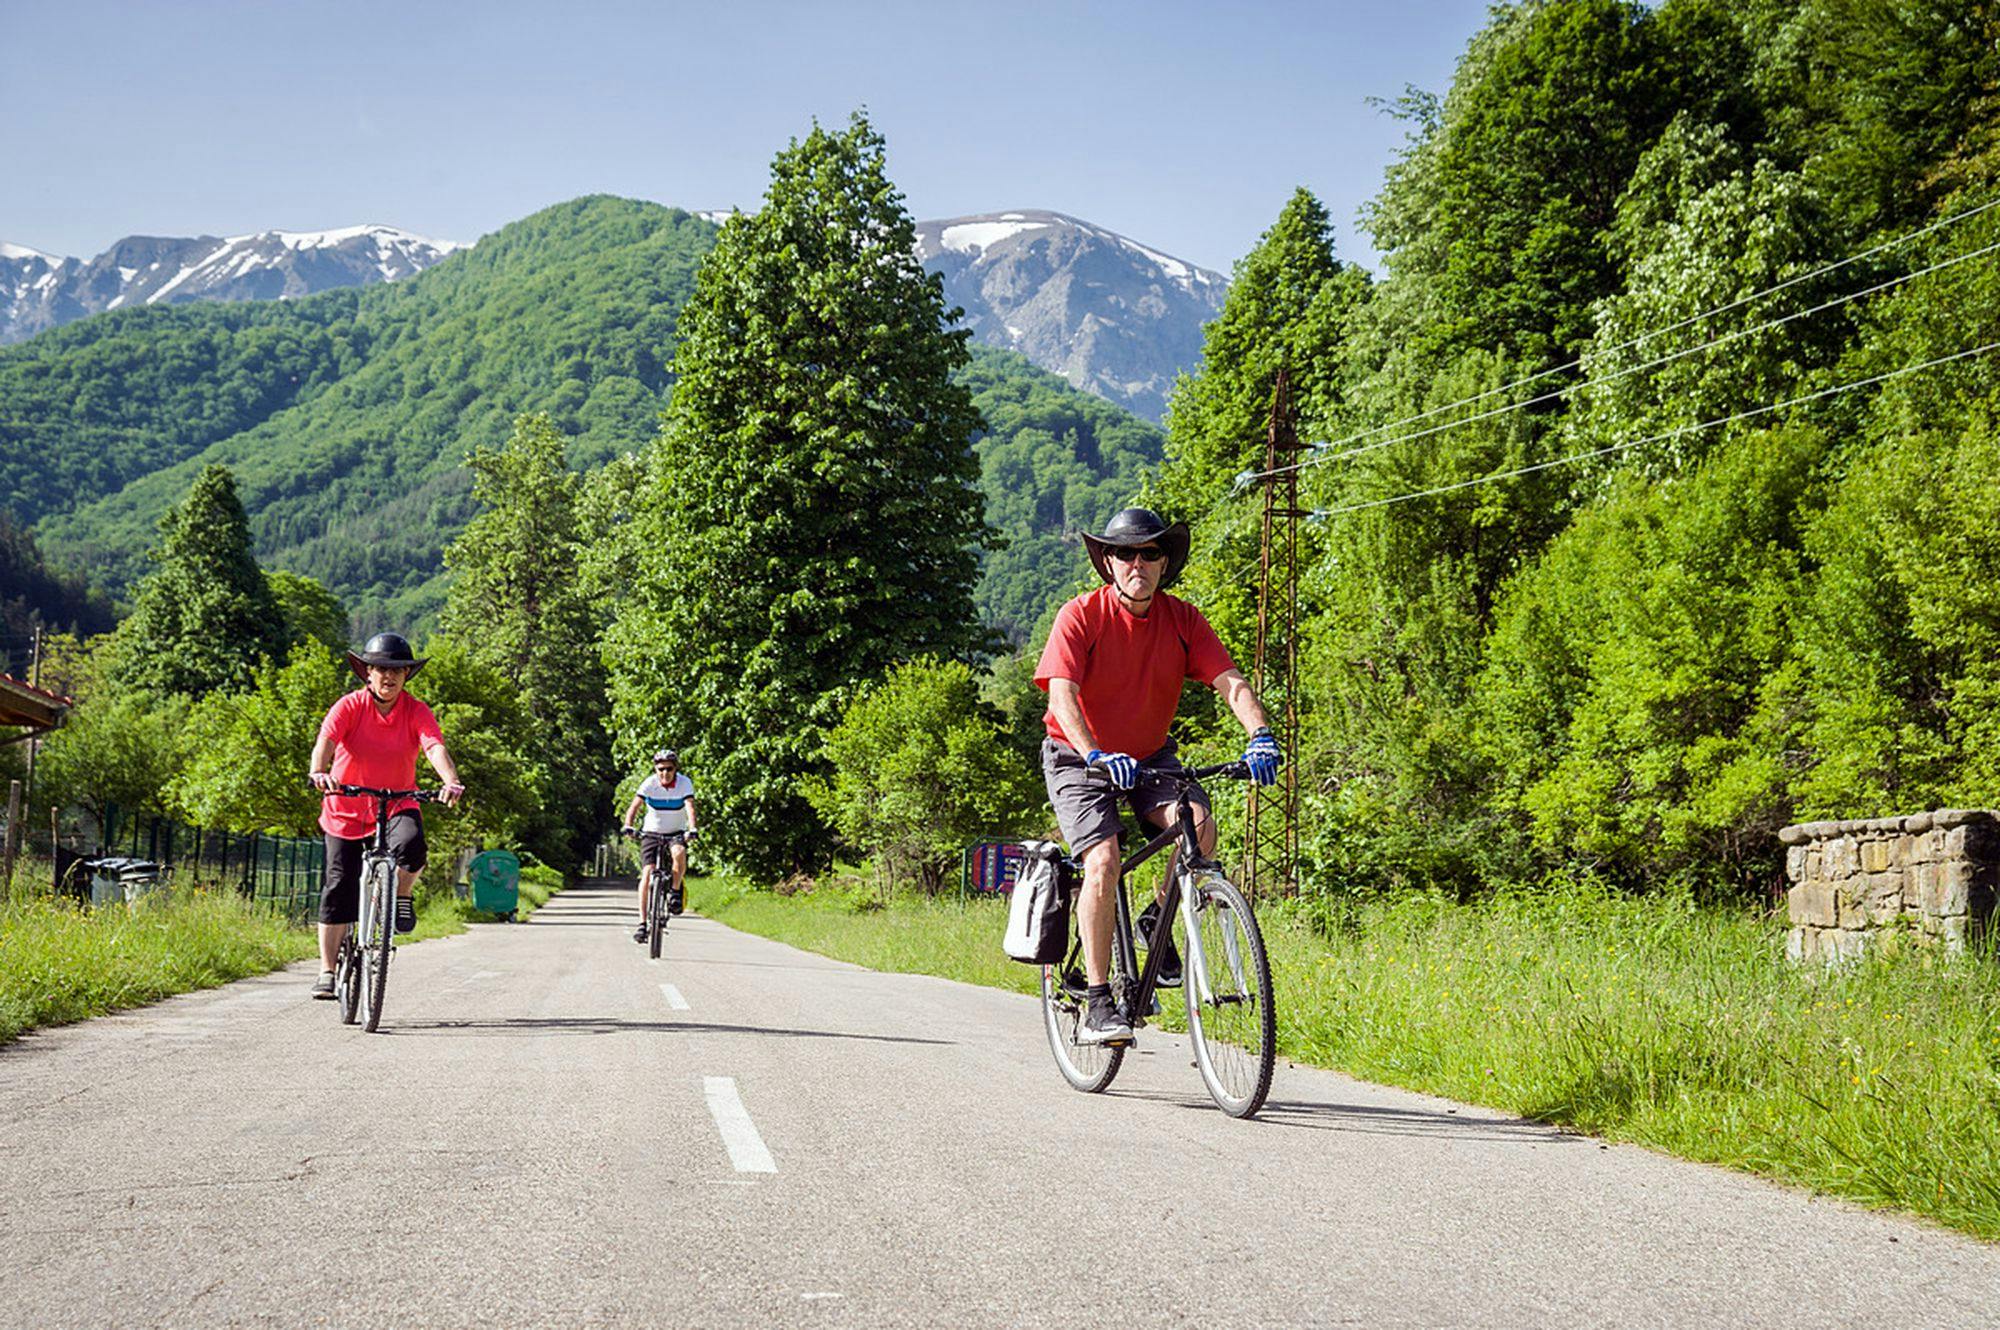 Cycling in the Heart of the Balkan Mountains